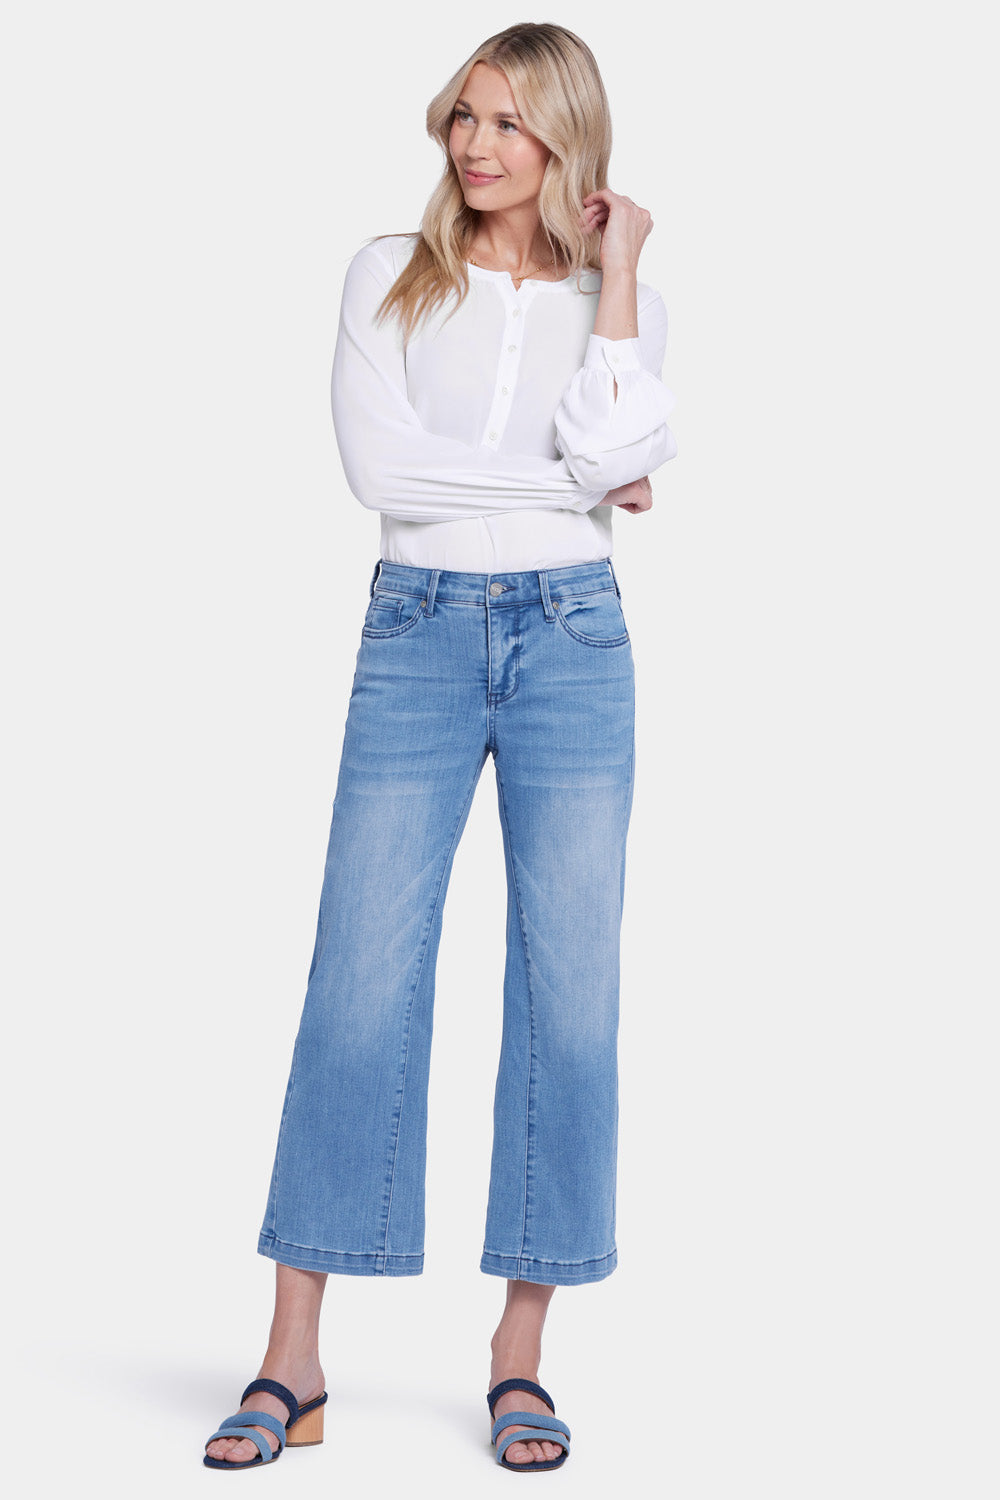 NYDJ Teresa Wide Leg Ankle Jeans With Contoured Inseams - Everly